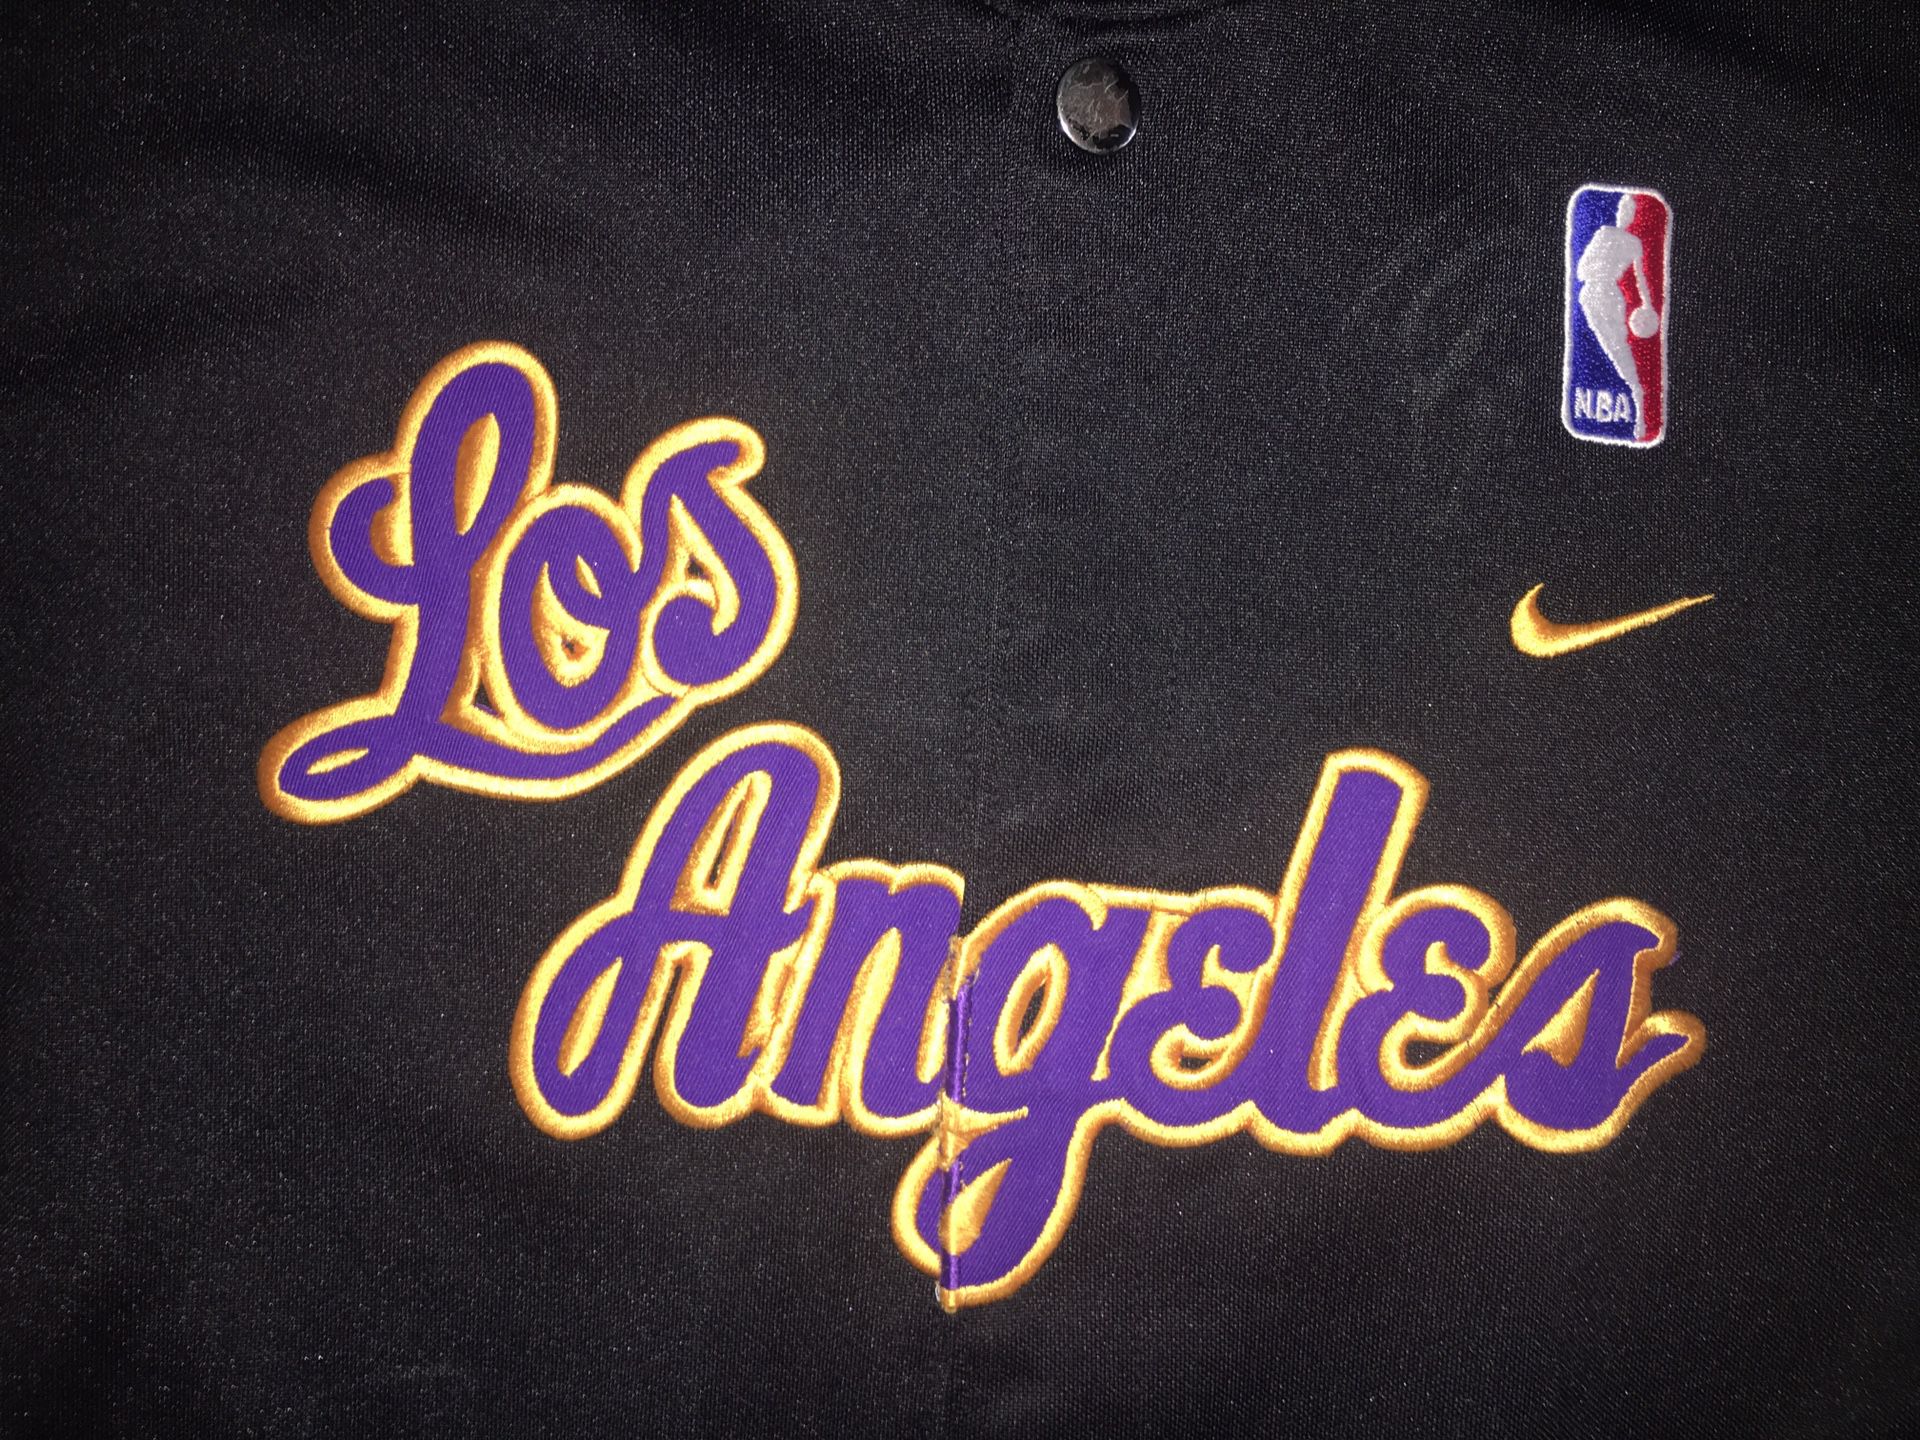 2001-04 AUTHENTIC LA LAKERS NIKE WARM-UP JERSEY L - Classic American Sports